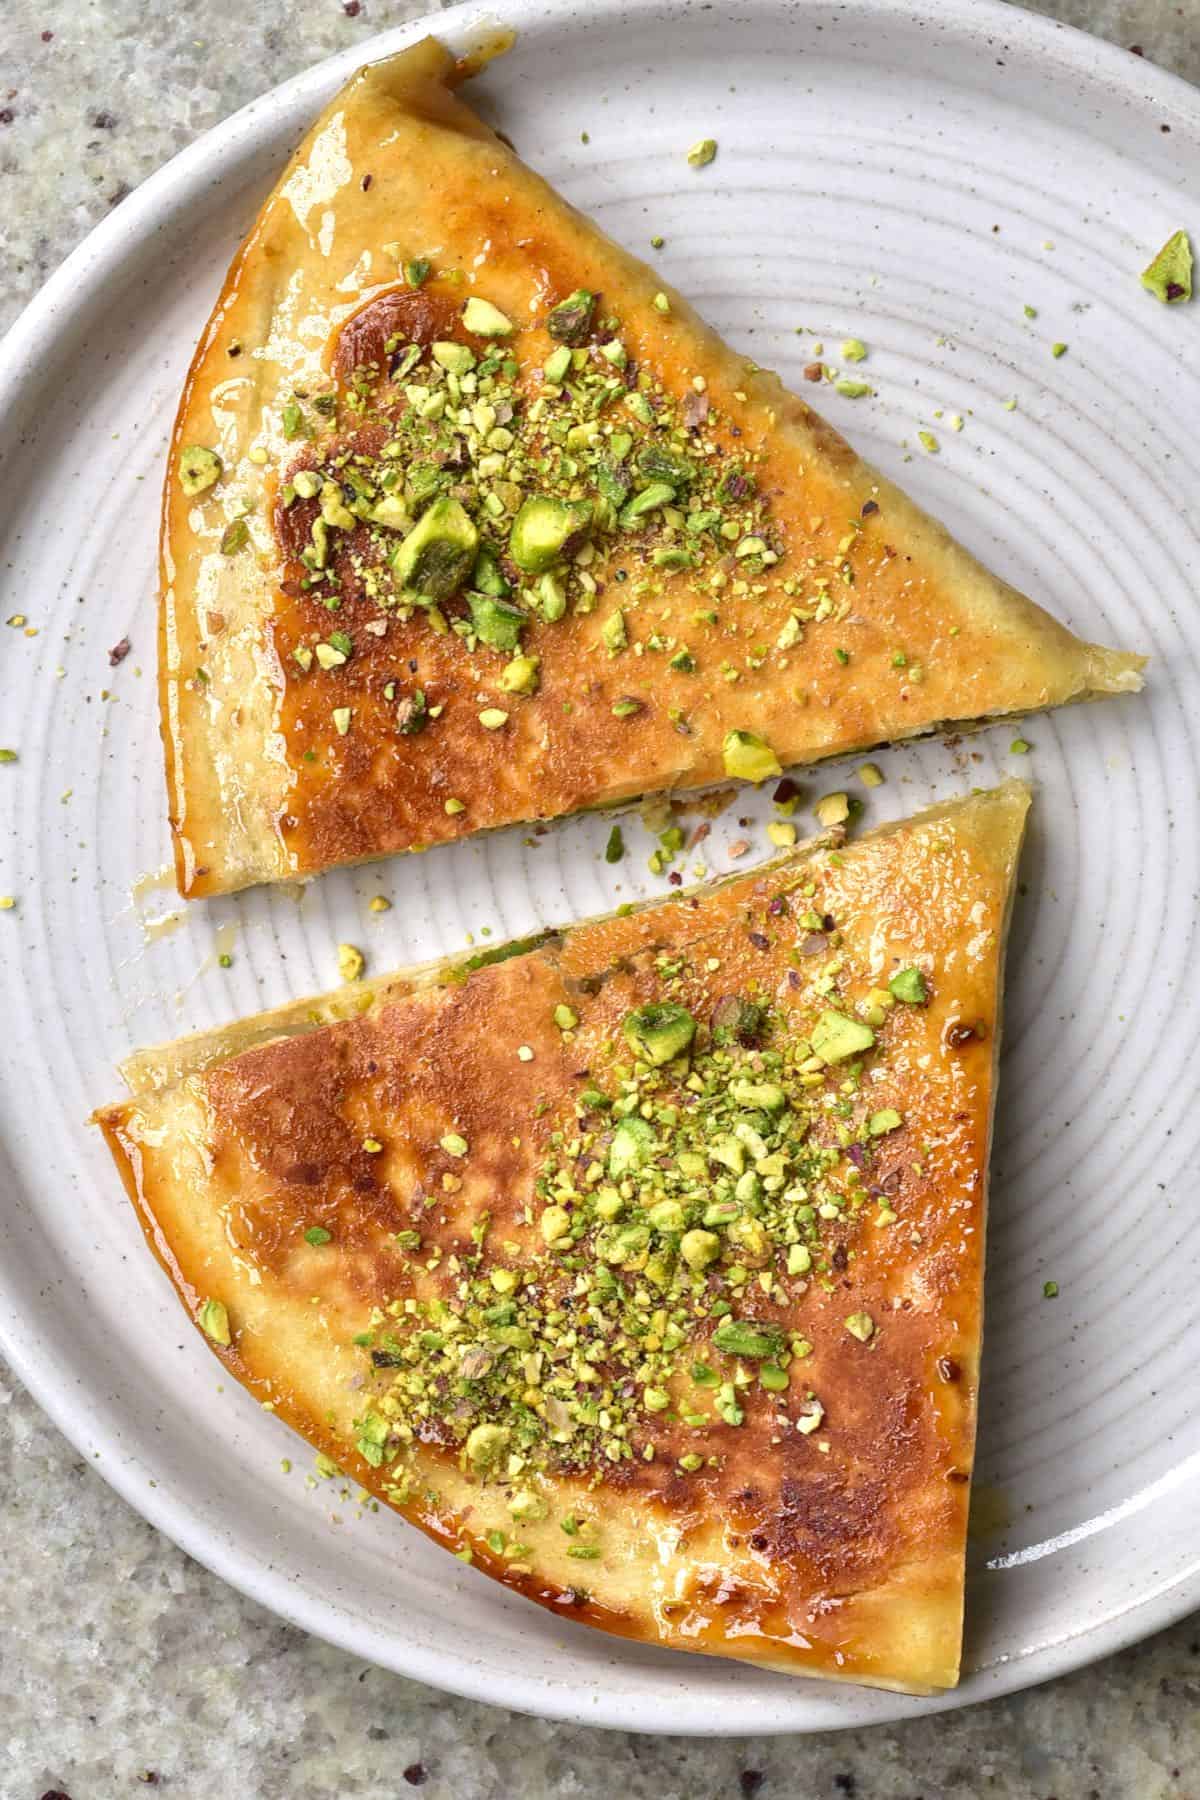 Baklava inspired folded tortilla topped with crushed pistachios